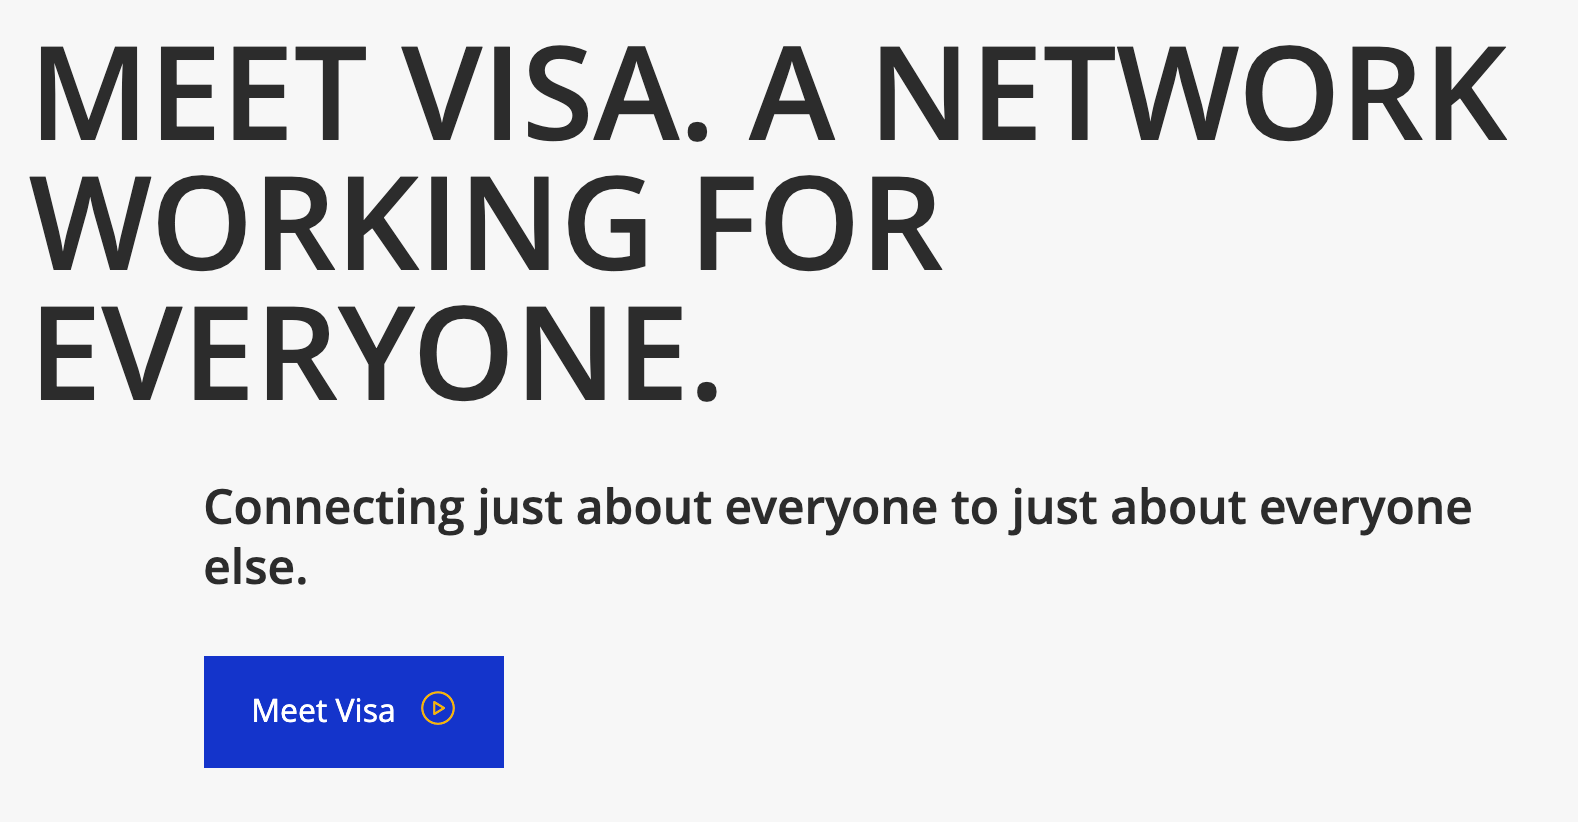 Visa’s brand essence is “available everywhere”, and their first screen design, commercials, and campaigns correspond to that value. Source: Visa